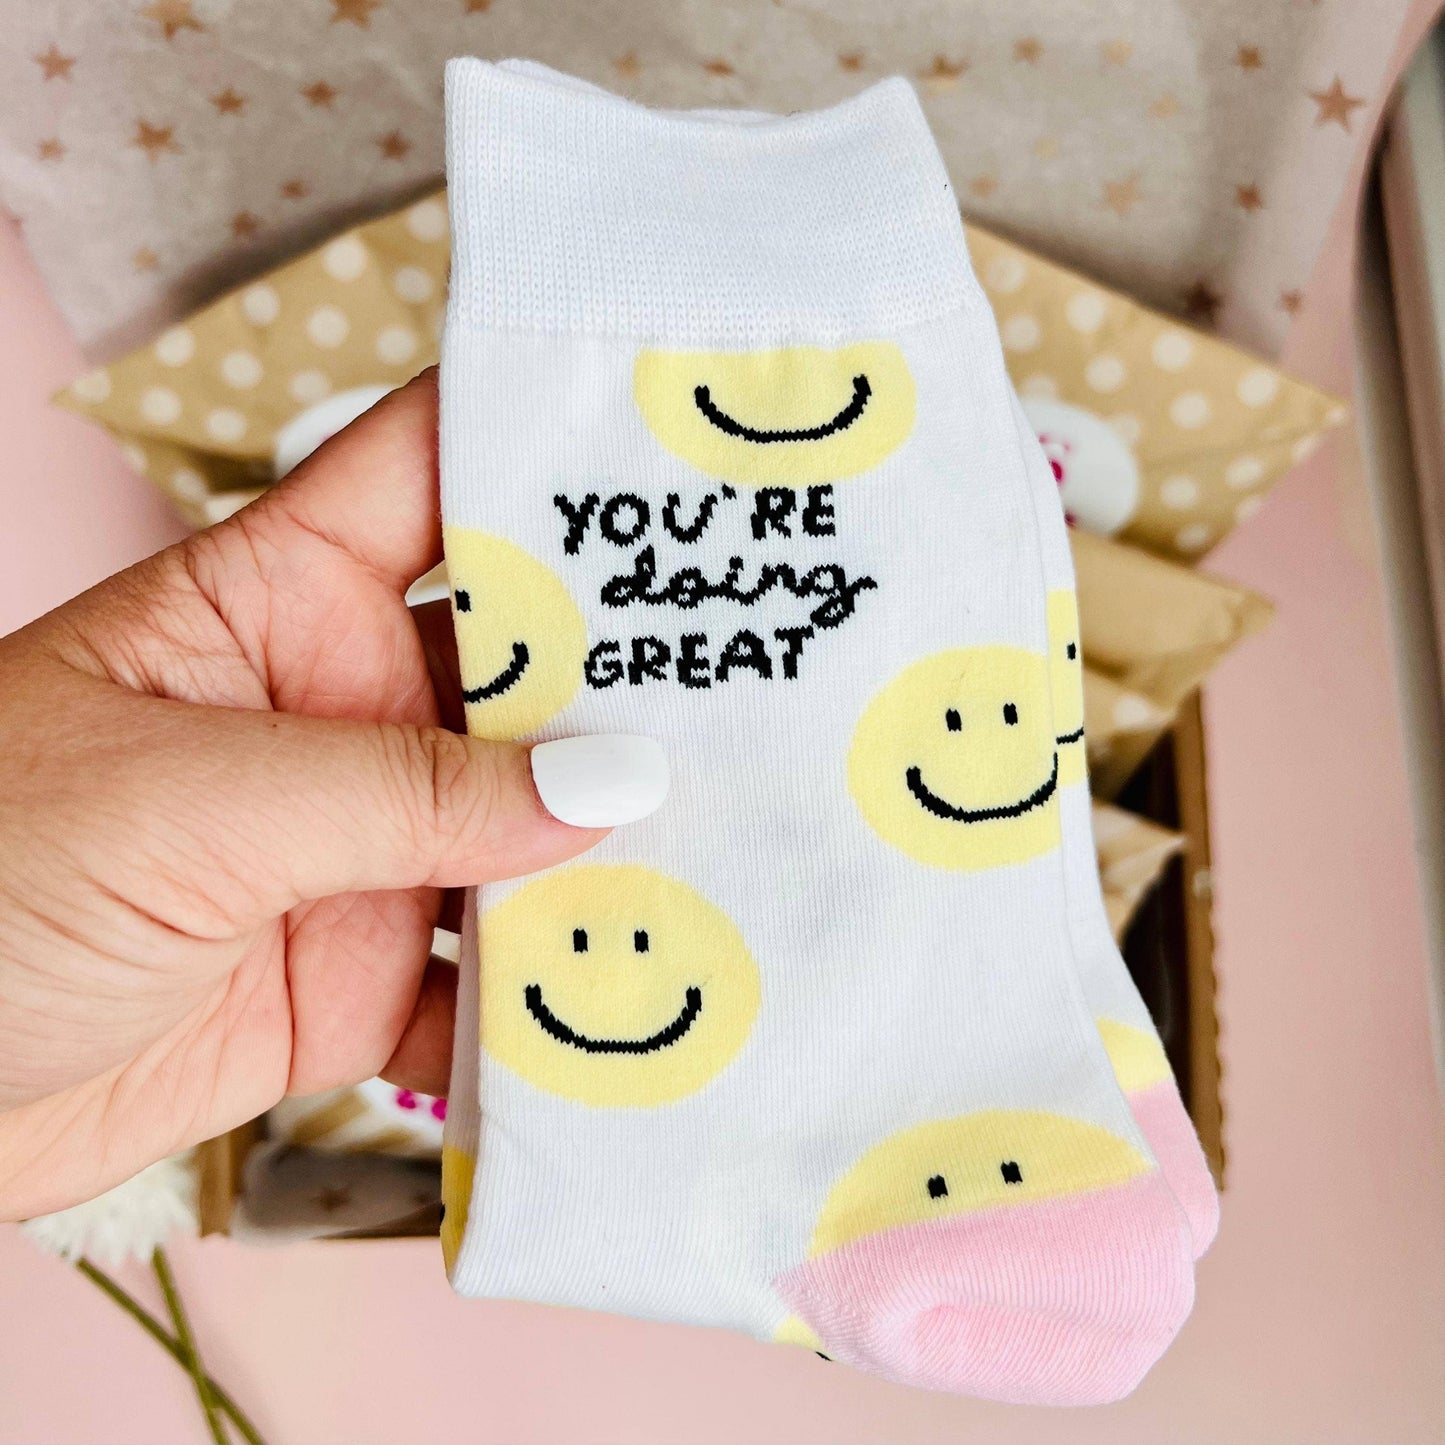 "You're Doing Great" Socks